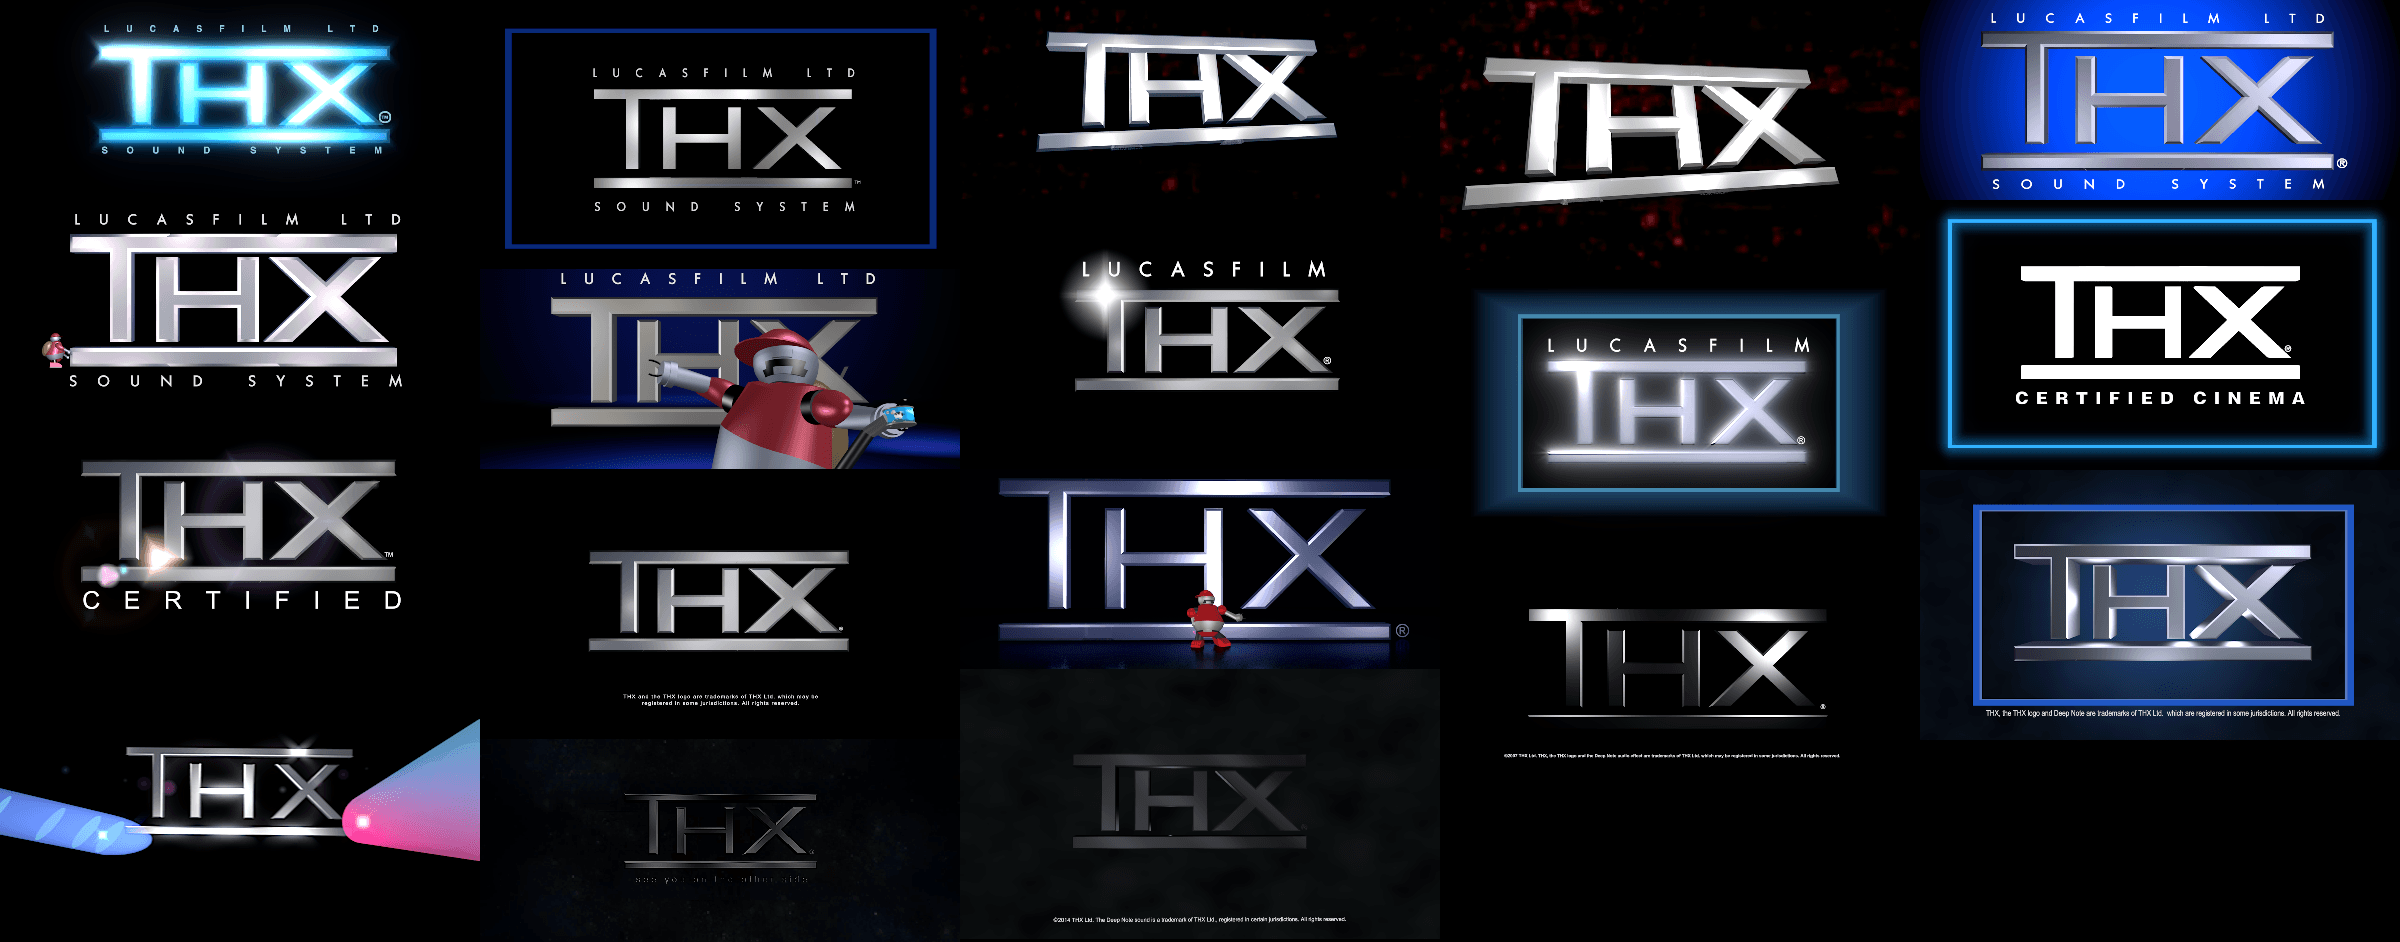 THX Logo - Download Link File Zghhy2hes757os2 THX